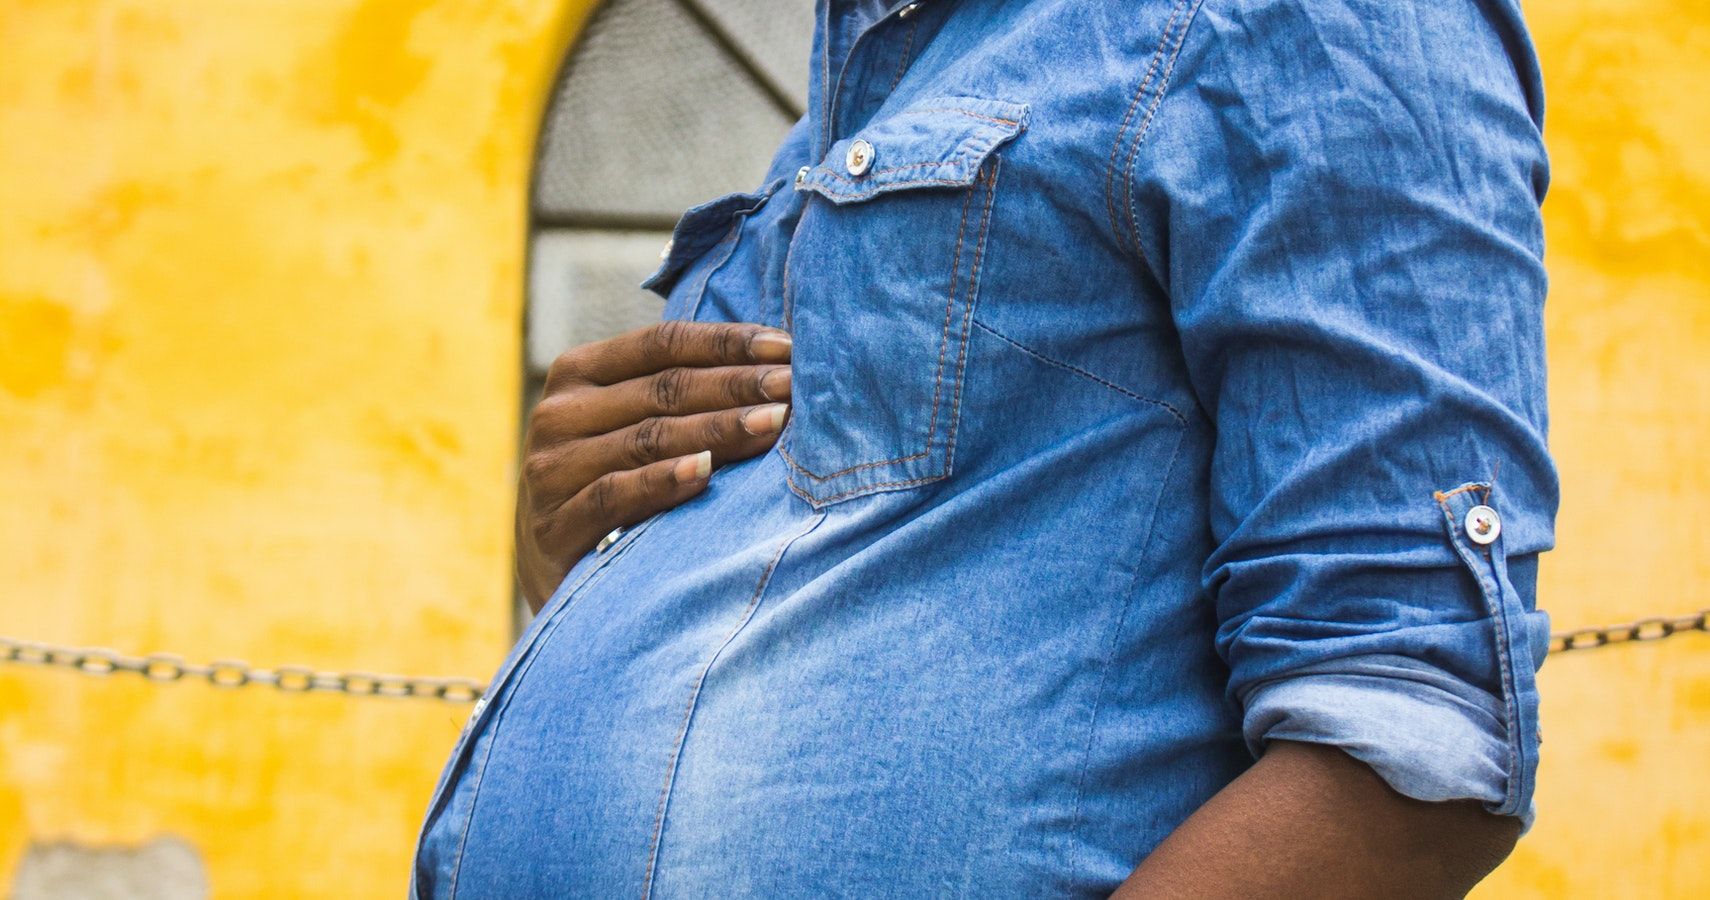 Pregnant Women At Higher Risk For COVID